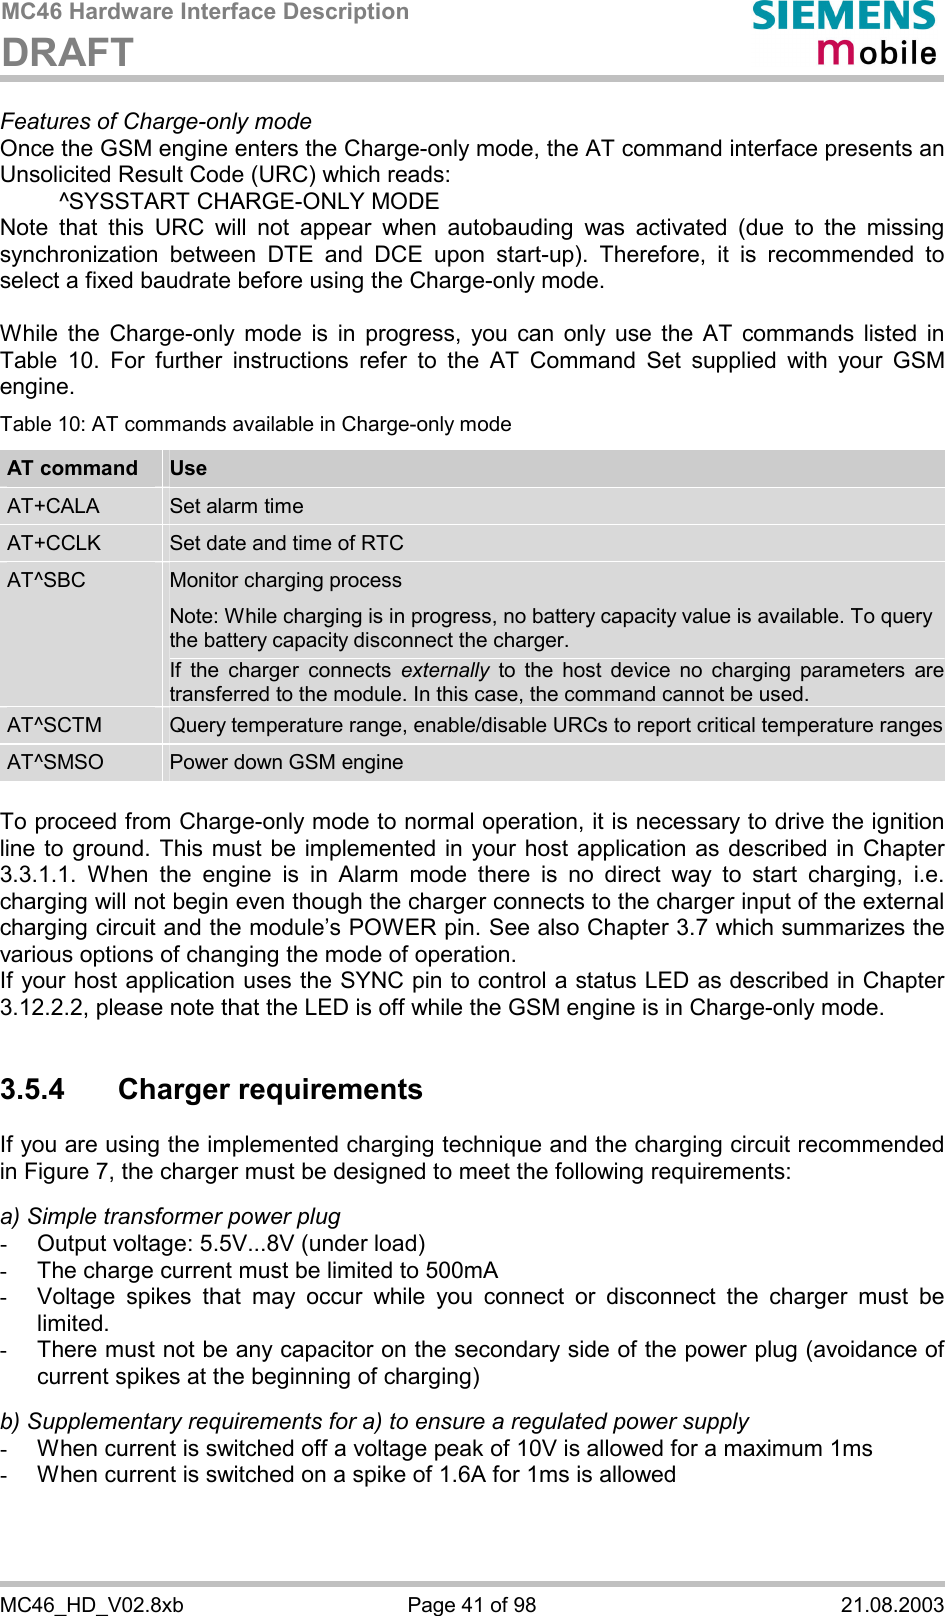 MC46 Hardware Interface Description DRAFT      MC46_HD_V02.8xb  Page 41 of 98  21.08.2003 Features of Charge-only mode Once the GSM engine enters the Charge-only mode, the AT command interface presents an Unsolicited Result Code (URC) which reads:   ^SYSSTART CHARGE-ONLY MODE Note that this URC will not appear when autobauding was activated (due to the missing synchronization between DTE and DCE upon start-up). Therefore, it is recommended to select a fixed baudrate before using the Charge-only mode.  While the Charge-only mode is in progress, you can only use the AT commands listed in Table 10. For further instructions refer to the AT Command Set supplied with your GSM engine. Table 10: AT commands available in Charge-only mode AT command  Use AT+CALA  Set alarm time AT+CCLK  Set date and time of RTC AT^SBC  Monitor charging process Note: While charging is in progress, no battery capacity value is available. To query the battery capacity disconnect the charger.  If the charger connects externally to the host device no charging parameters are transferred to the module. In this case, the command cannot be used. AT^SCTM  Query temperature range, enable/disable URCs to report critical temperature rangesAT^SMSO  Power down GSM engine  To proceed from Charge-only mode to normal operation, it is necessary to drive the ignition line to ground. This must be implemented in your host application as described in Chapter 3.3.1.1. When the engine is in Alarm mode there is no direct way to start charging, i.e. charging will not begin even though the charger connects to the charger input of the external charging circuit and the module’s POWER pin. See also Chapter 3.7 which summarizes the various options of changing the mode of operation. If your host application uses the SYNC pin to control a status LED as described in Chapter 3.12.2.2, please note that the LED is off while the GSM engine is in Charge-only mode.  3.5.4 Charger requirements If you are using the implemented charging technique and the charging circuit recommended in Figure 7, the charger must be designed to meet the following requirements:   a) Simple transformer power plug -  Output voltage: 5.5V...8V (under load) -  The charge current must be limited to 500mA -  Voltage spikes that may occur while you connect or disconnect the charger must be limited. -  There must not be any capacitor on the secondary side of the power plug (avoidance of current spikes at the beginning of charging)  b) Supplementary requirements for a) to ensure a regulated power supply  -  When current is switched off a voltage peak of 10V is allowed for a maximum 1ms -  When current is switched on a spike of 1.6A for 1ms is allowed  